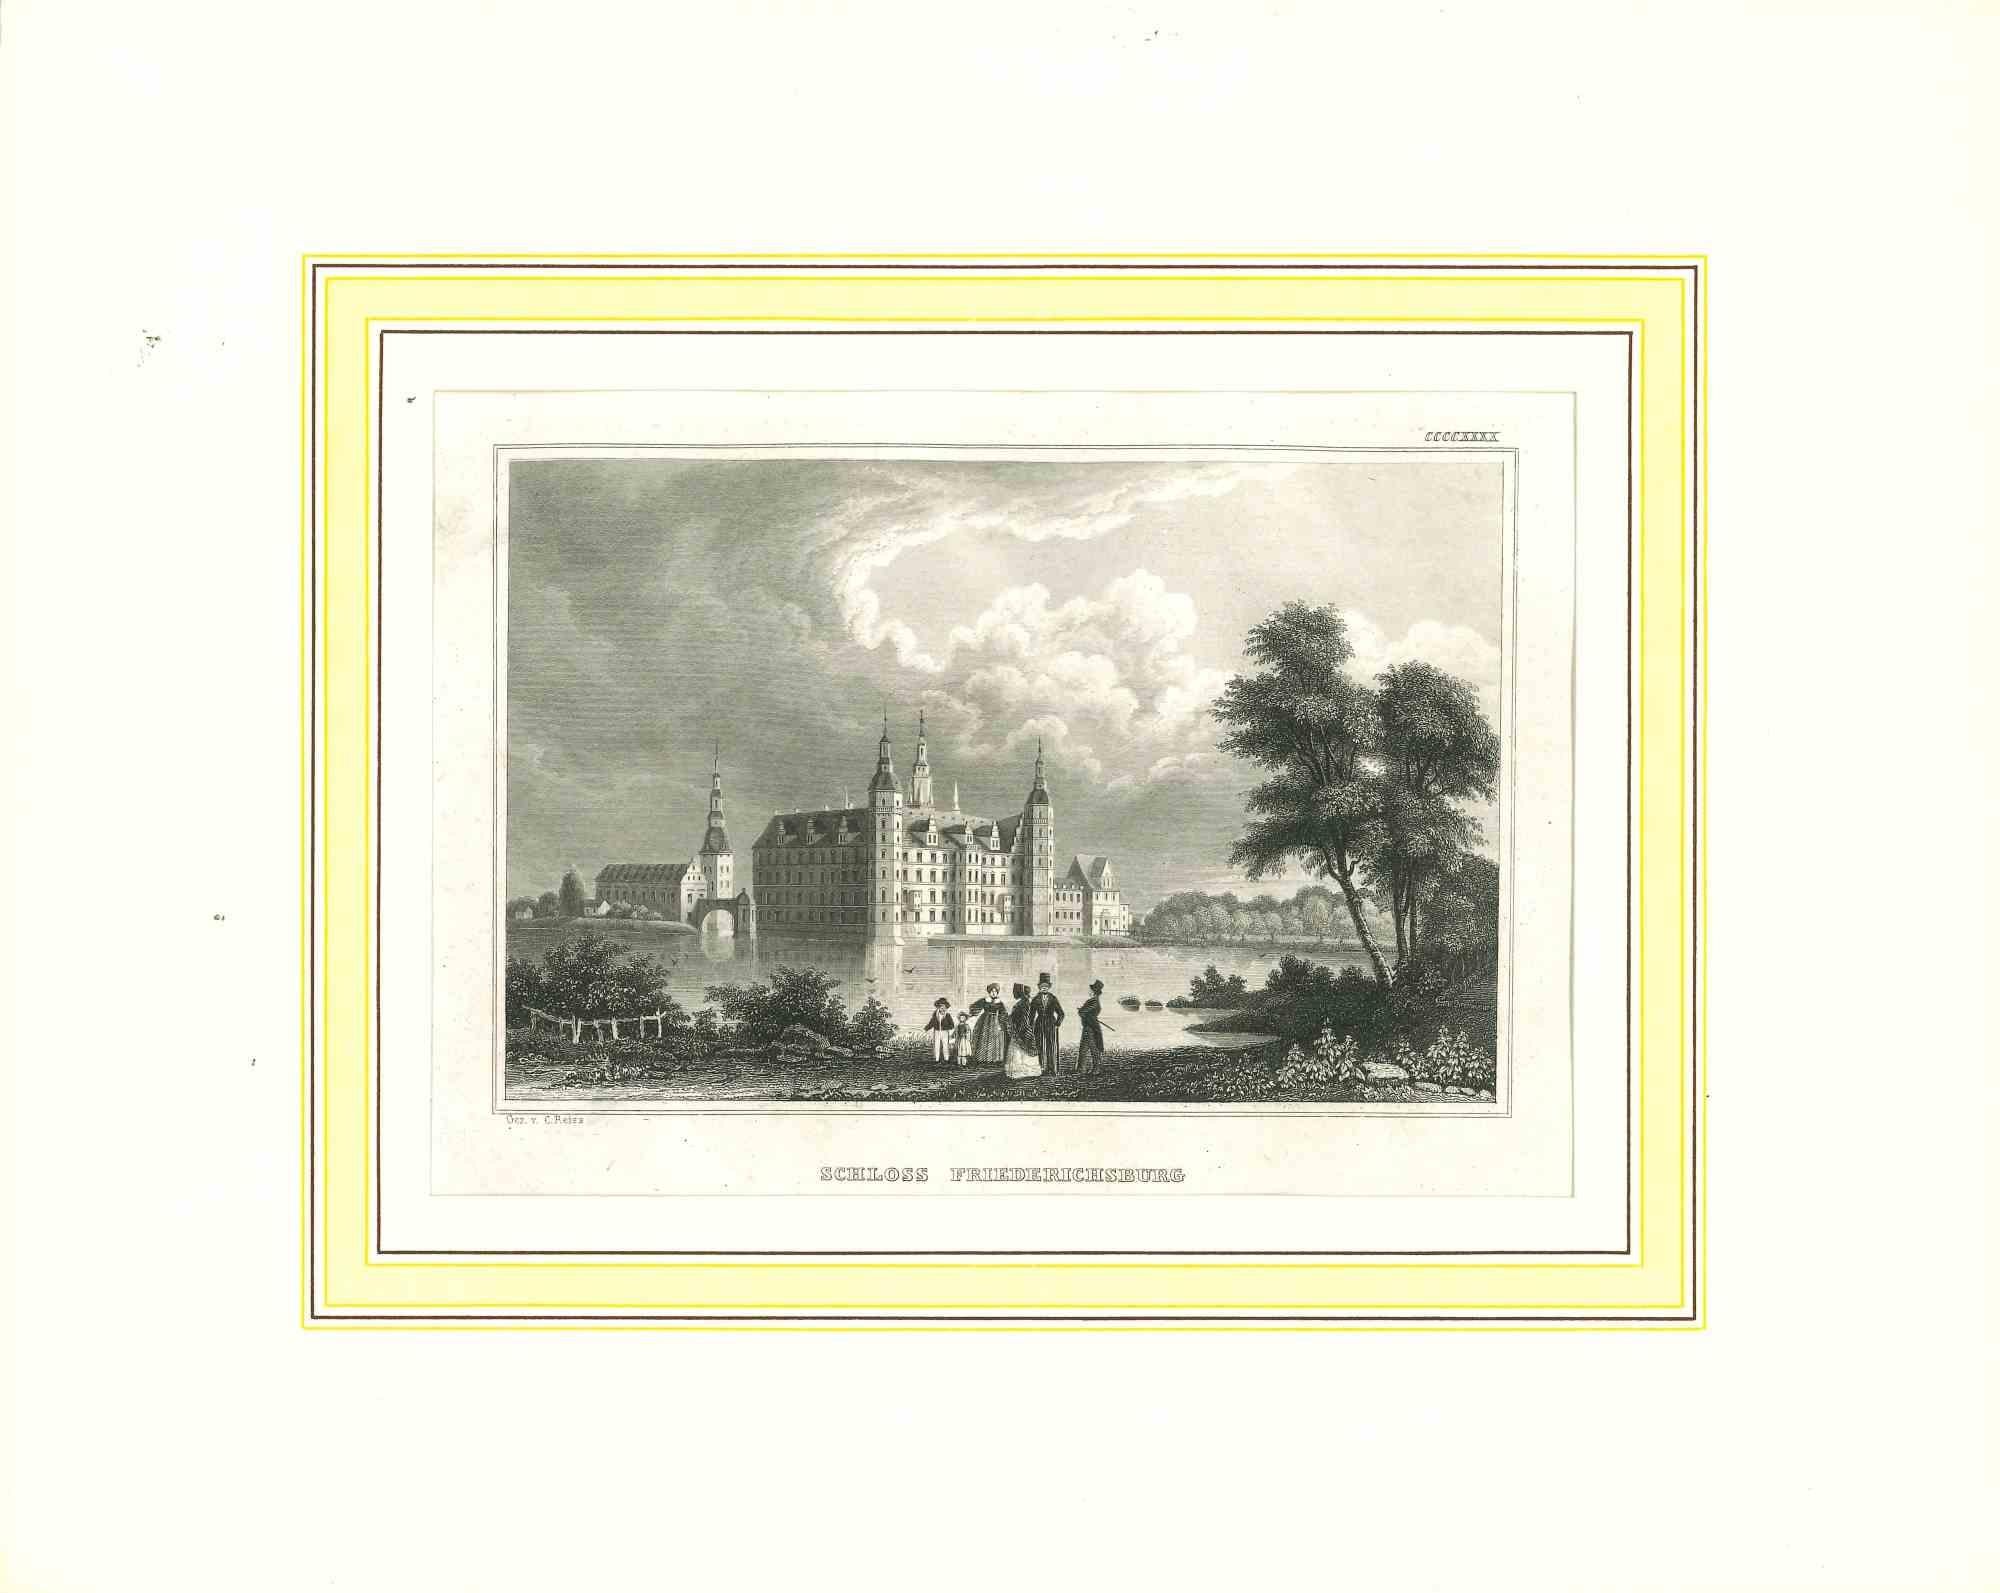 Unknown Figurative Print - Ancient of Schloss Friederichsburg - Lithograph on Paper - Early 19th Century